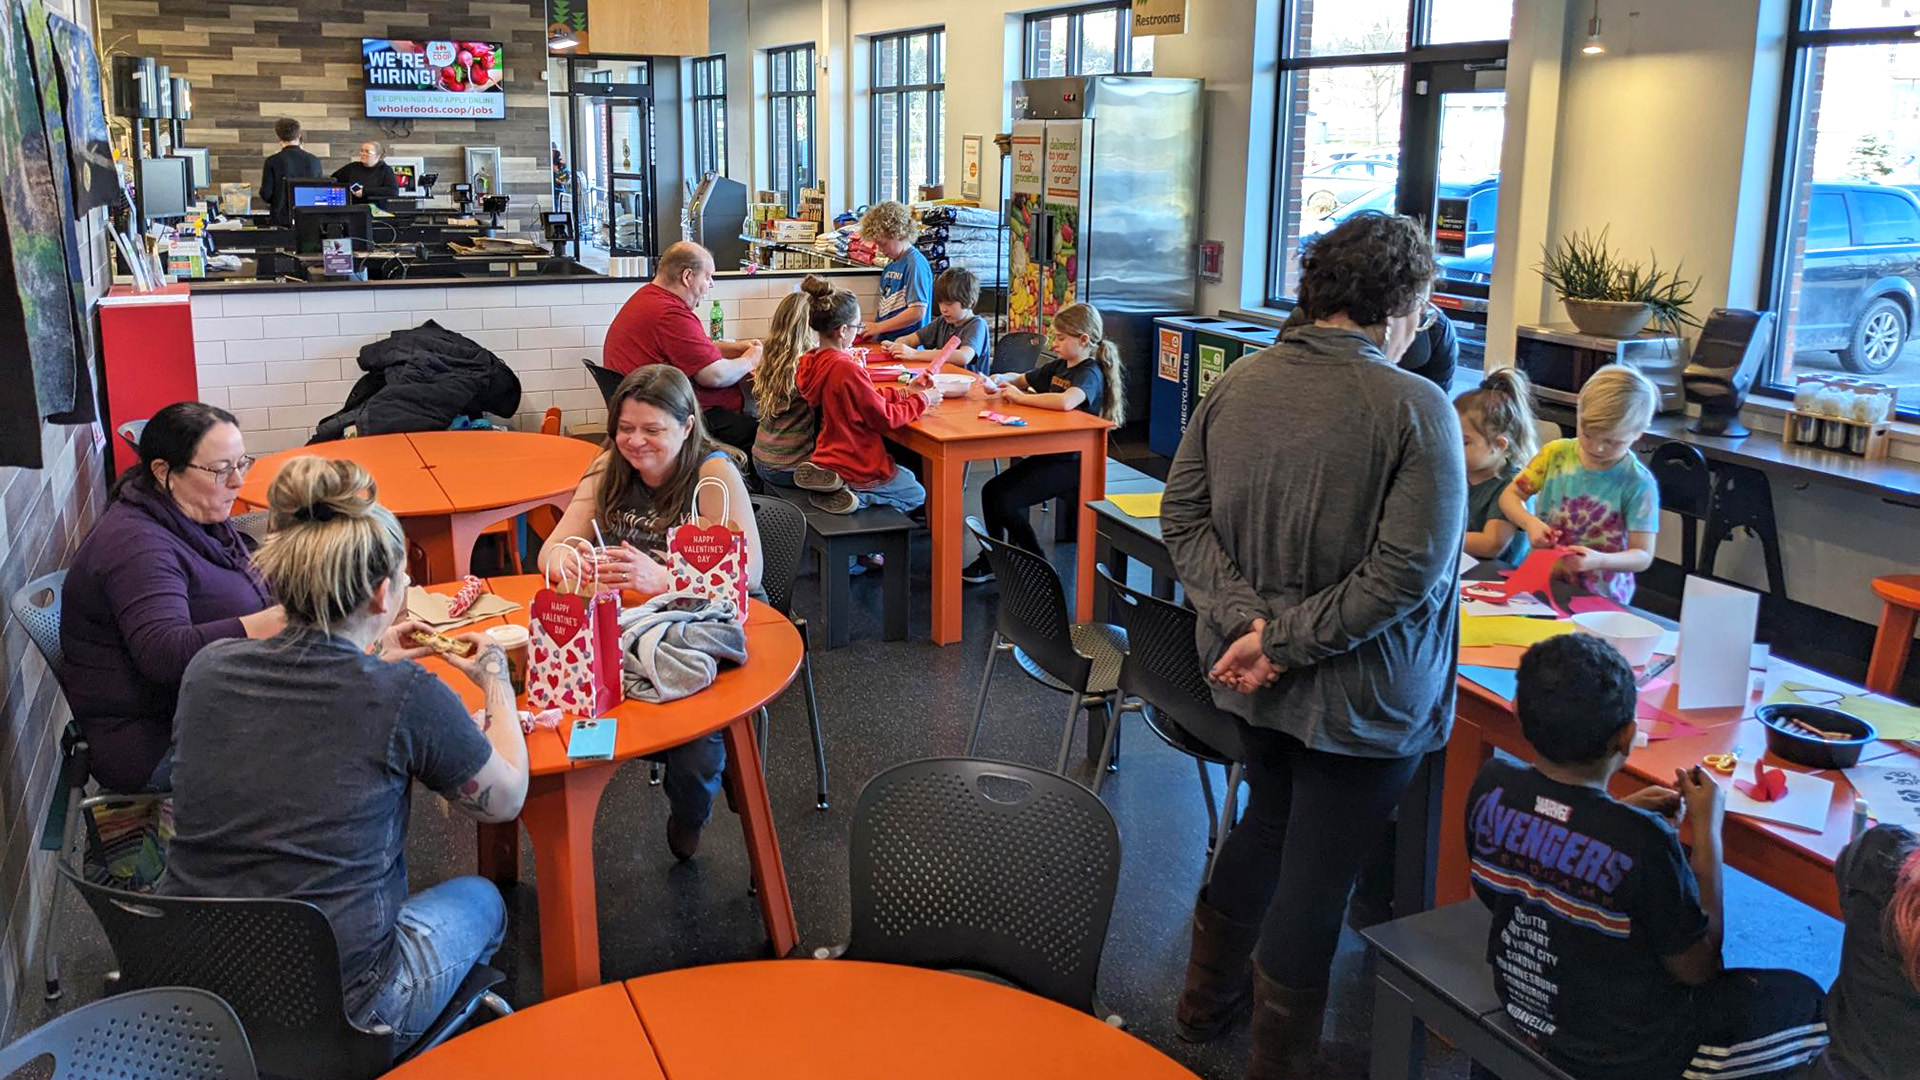 People are sitting at orange tables in a cafe at Whole Foods Coop Duluth MN, engaging in various activities such as drawing and crafting. A man is working at a counter in the background, and large windows line the walls, letting in natural light. A TV screen is visible near the counter.